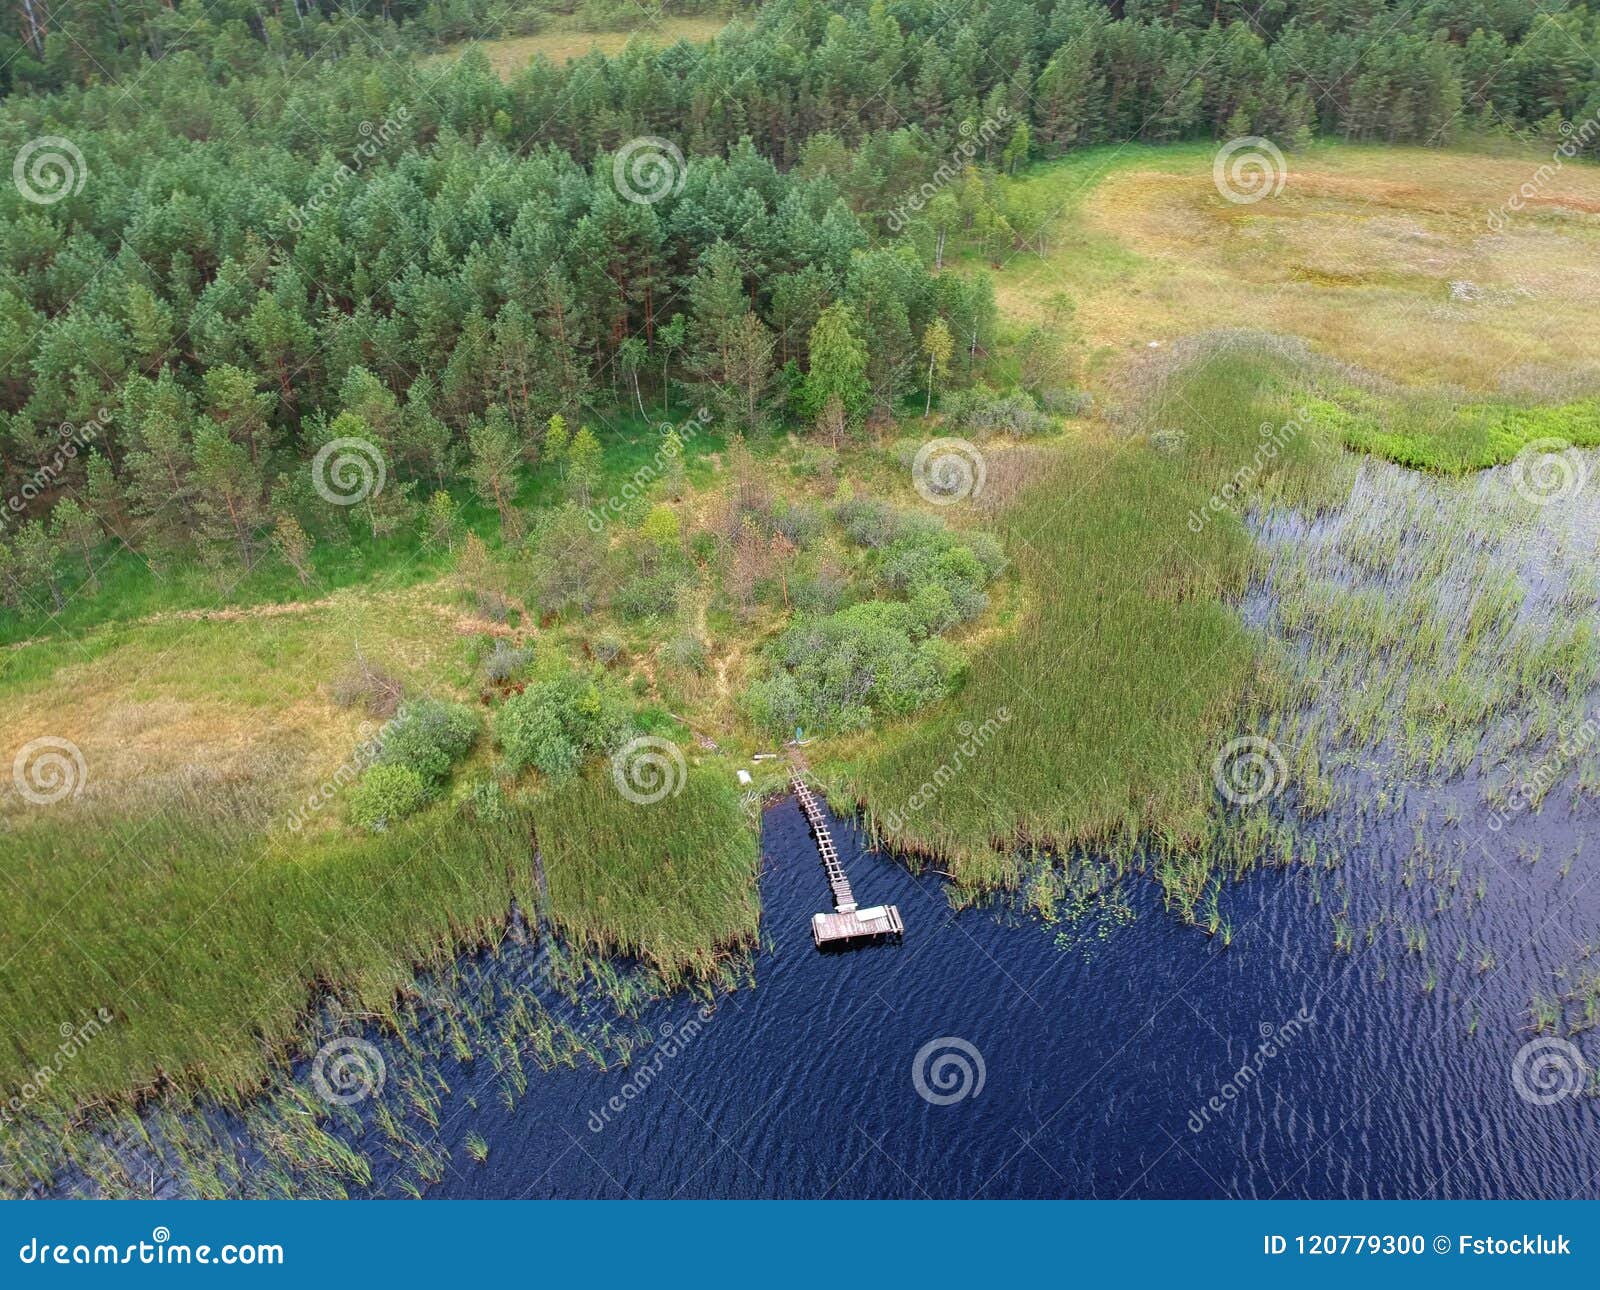 old wooden platform on calm lakem forest and reed, aerial view